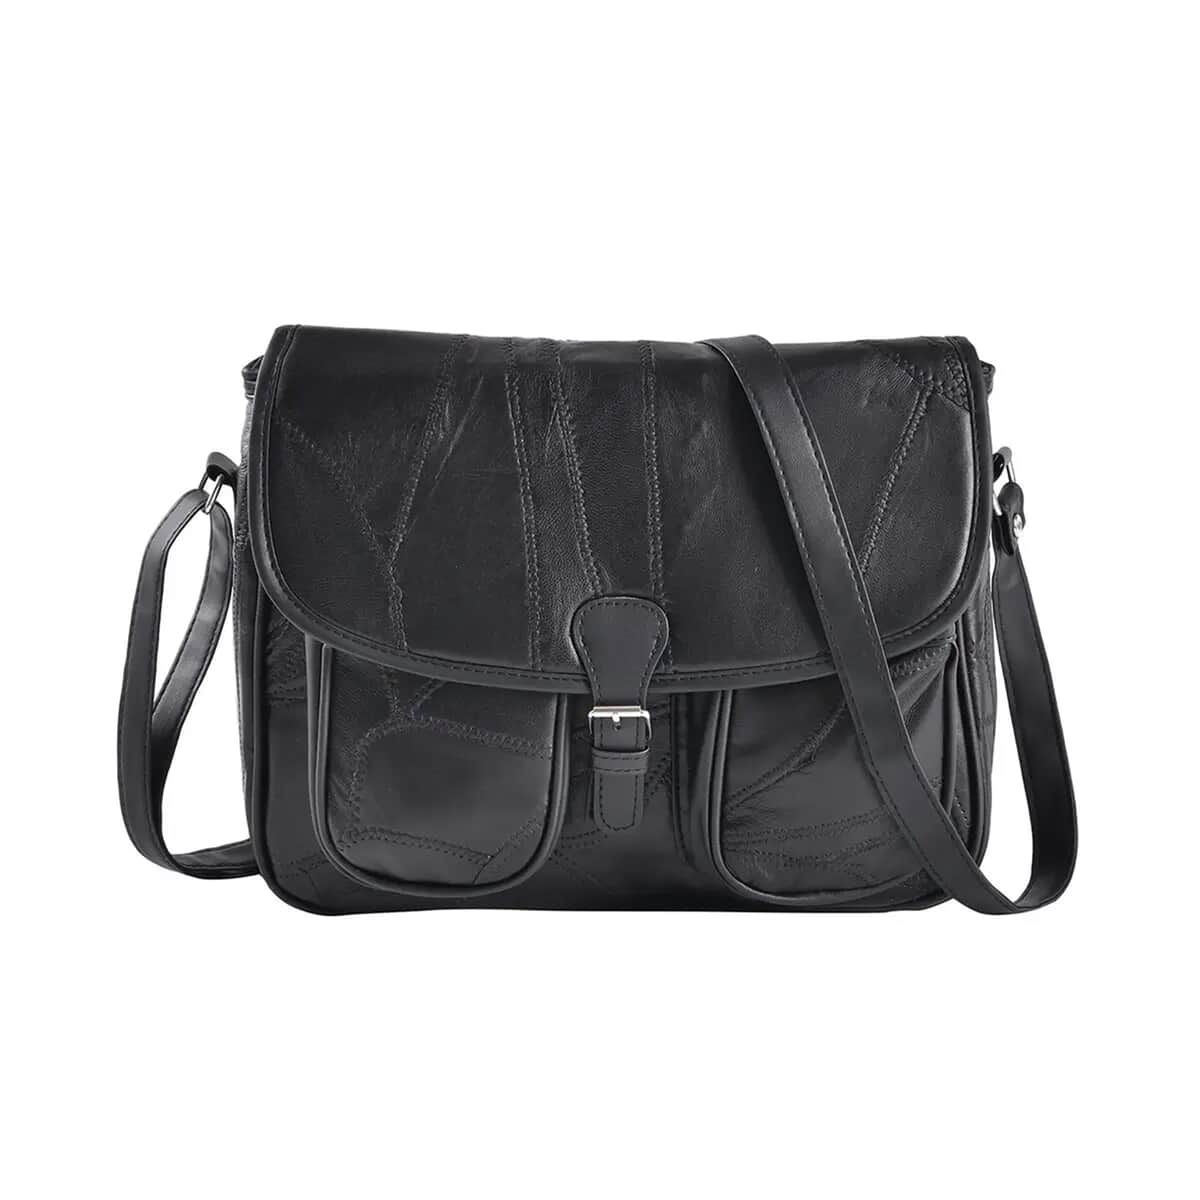 Black Patch Work Sheep Leather Crossbody Bag with Faux Leather Trim with Adjustable Shoulder Strap image number 0